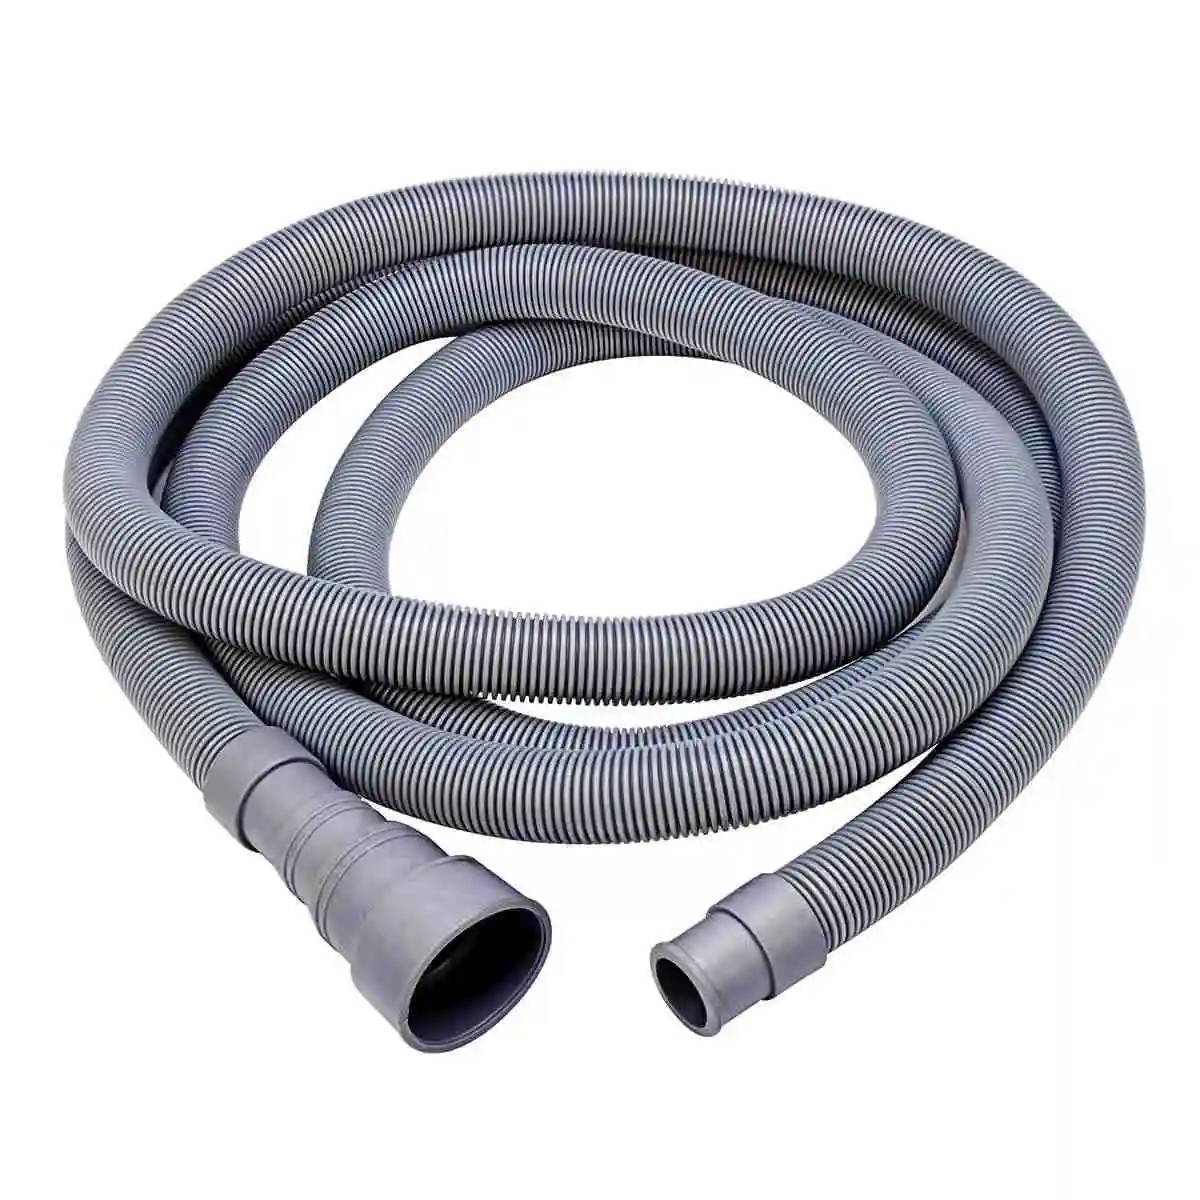 Elastic Connector For Waching Machine Flexible Drain Magic Sewer Pipe Sink Basin Drainer Waste Hose